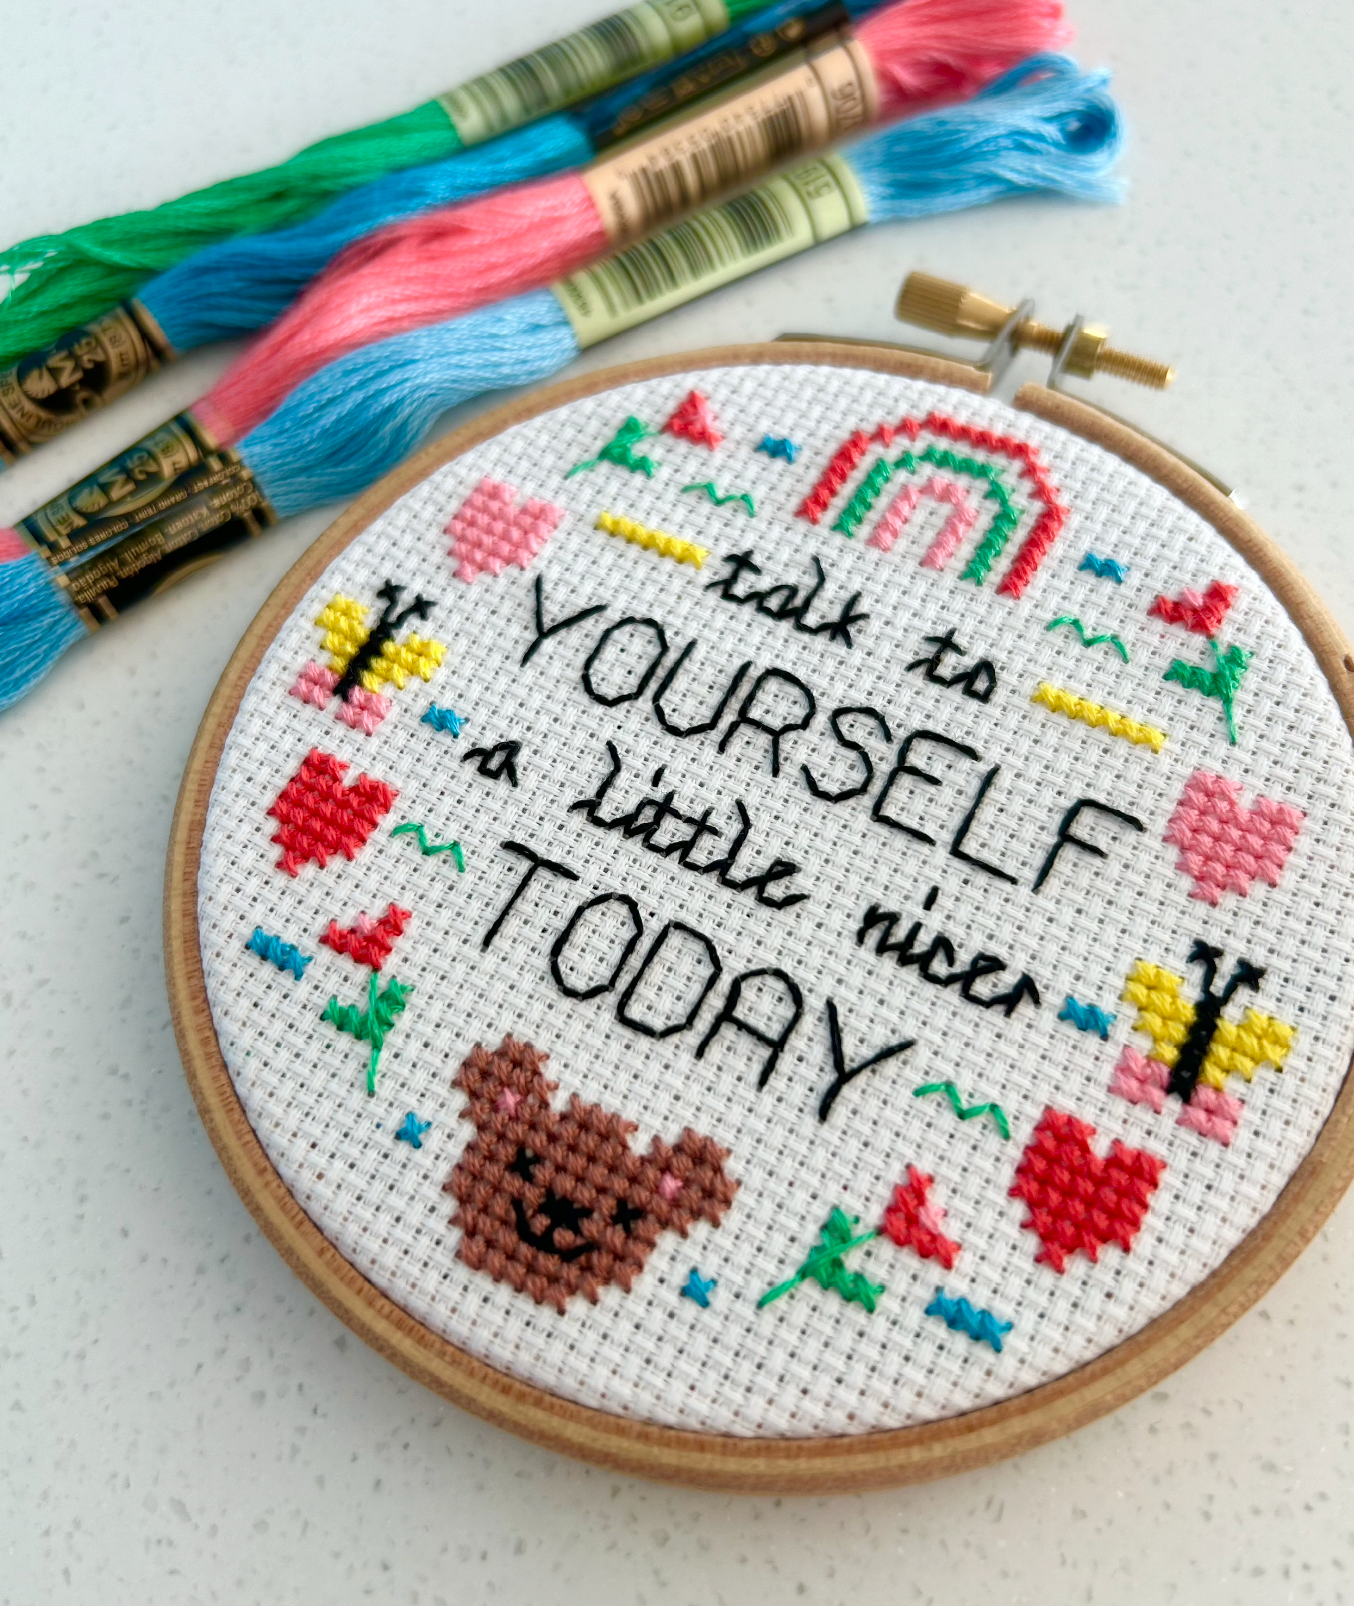 Talk to yourself a little nicer today  - *Cross Stitch Kit*